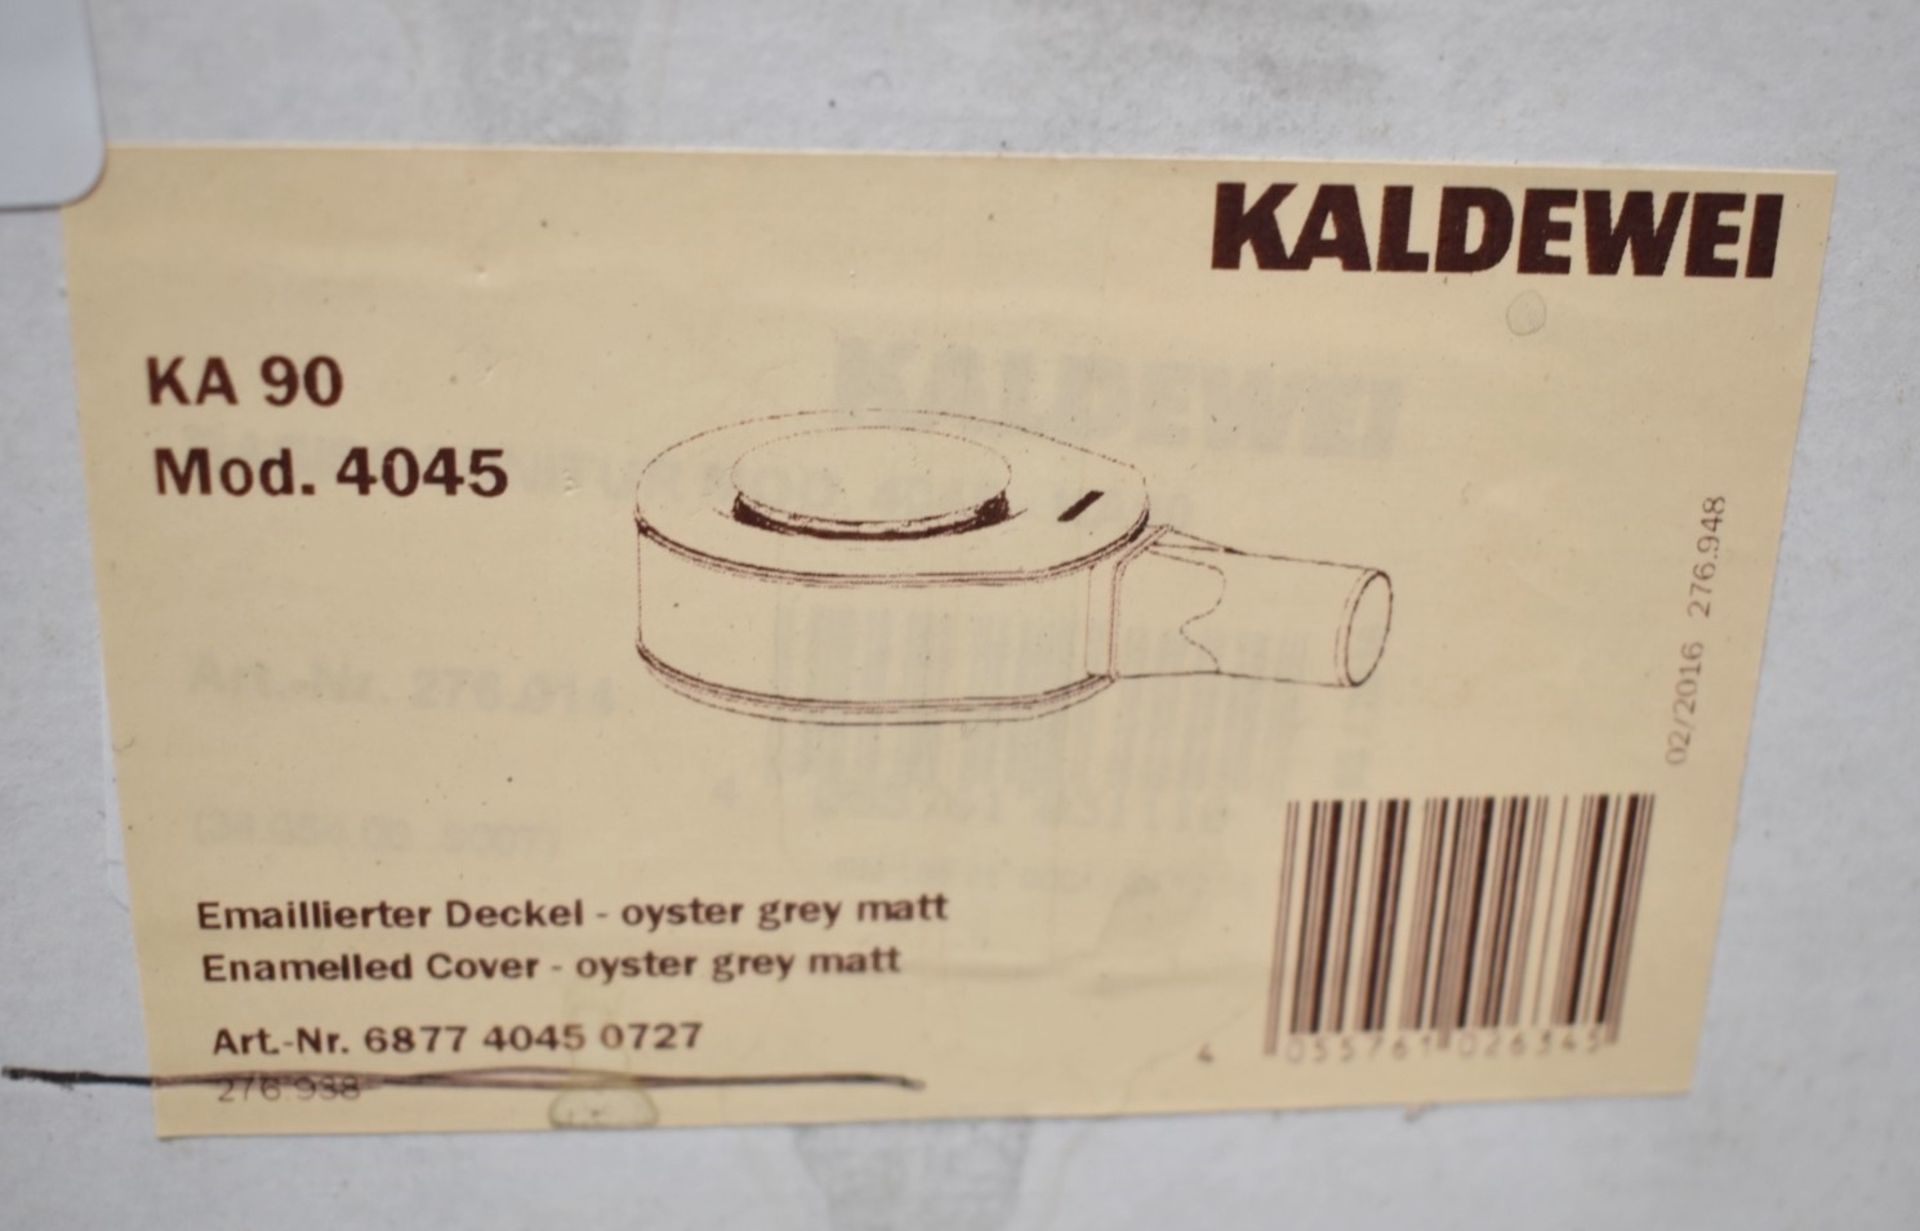 1 x KALDEWEI 4045 Waste and Cover, In Oyster Grey - Boxed Stock - RRP £166.00 - Prod: BST26310 - - Image 2 of 4